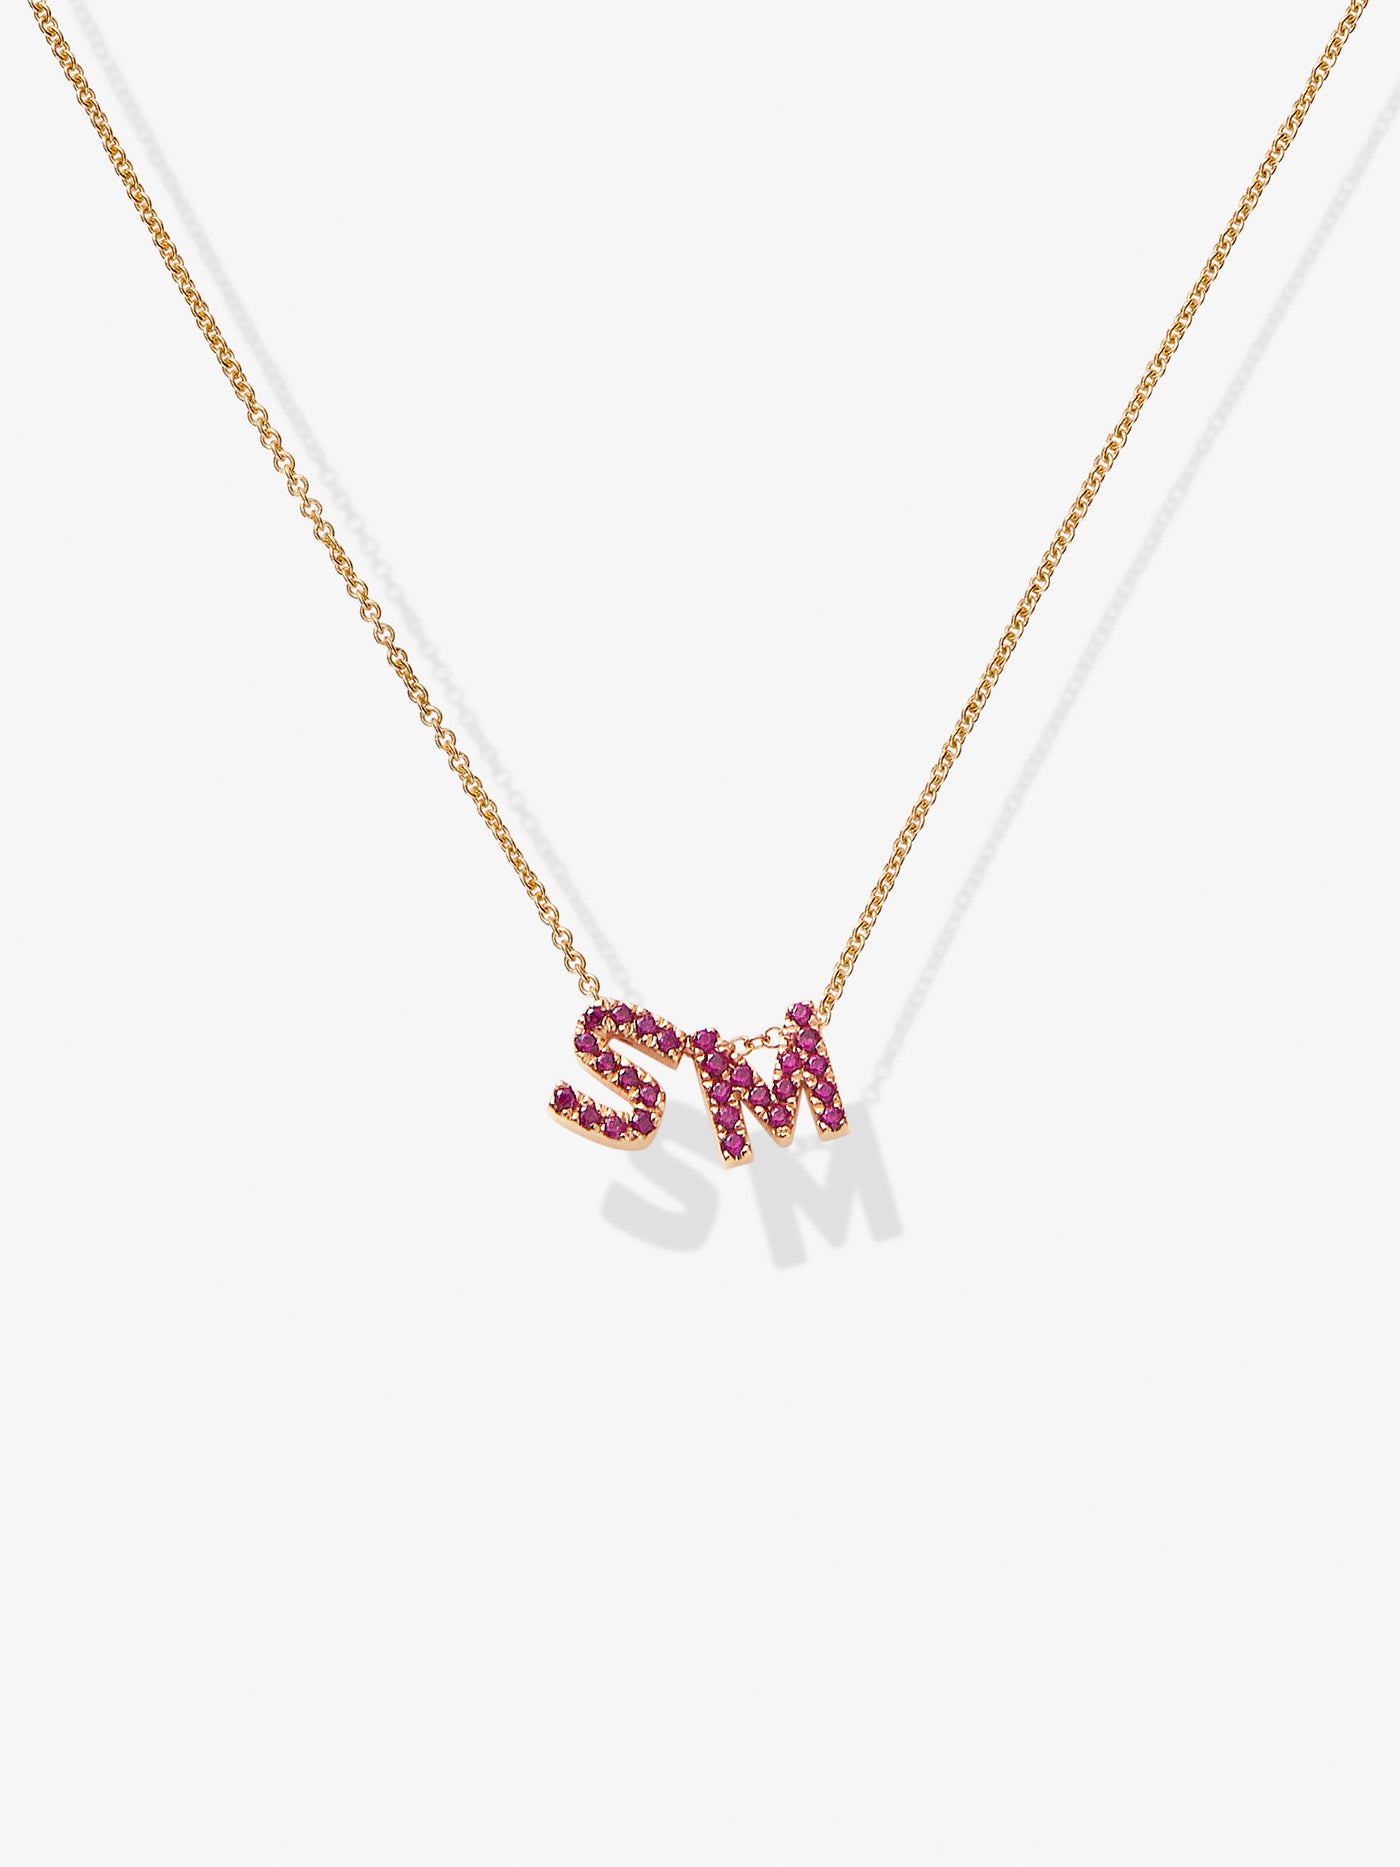 Two Letters Necklace in Ruby and 18k Rose Gold